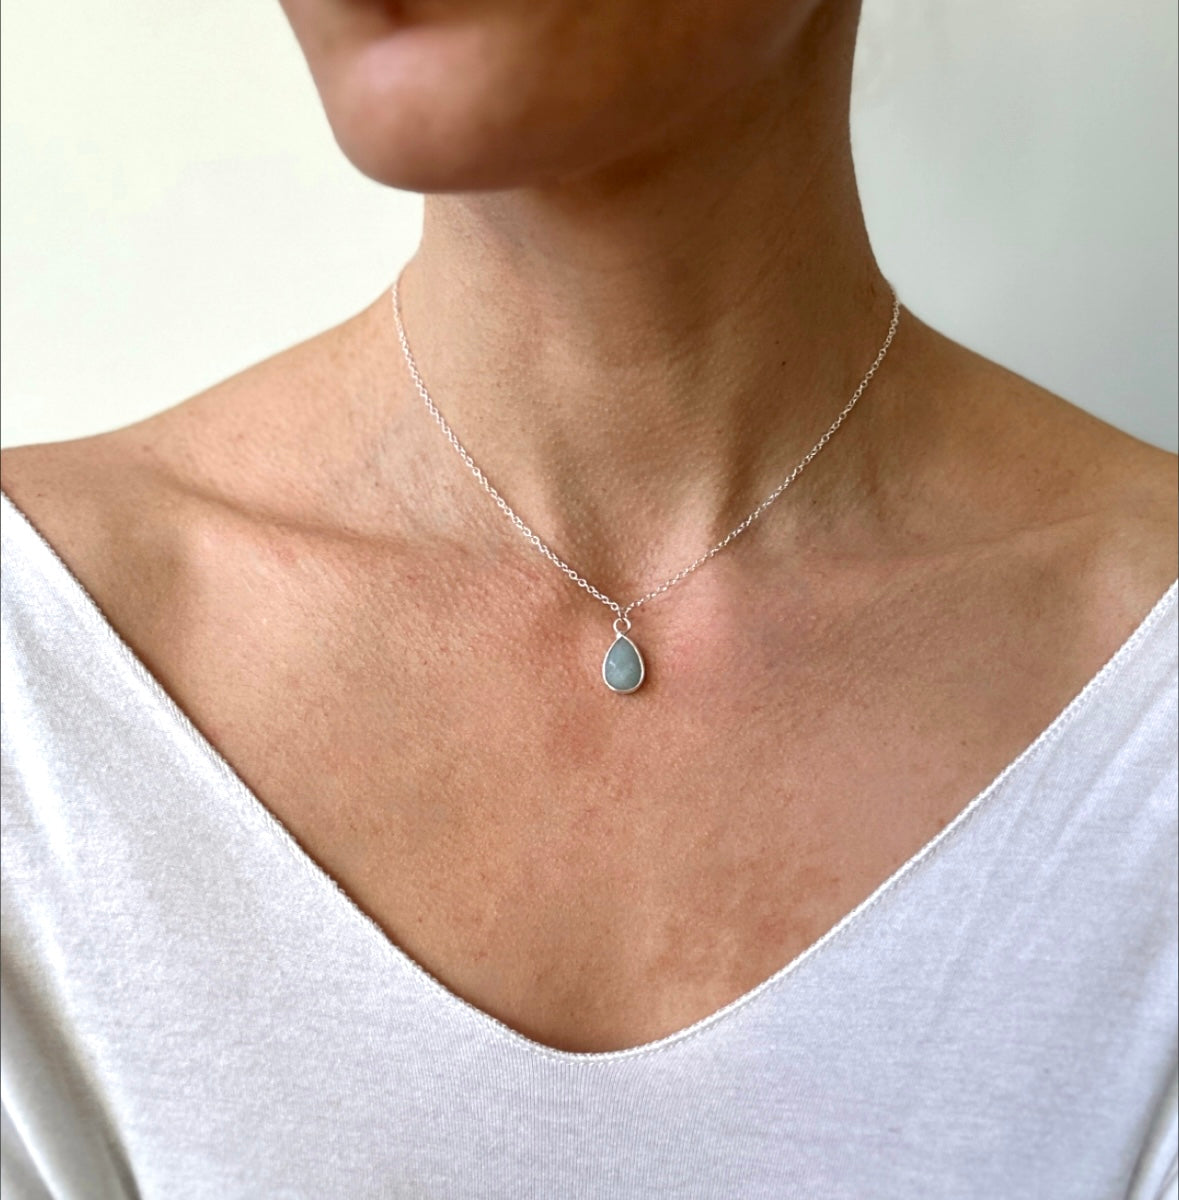 Introducing the Baya Necklace: A sterling silver pendant necklace adorned with a captivating Aquamarine gemstone.